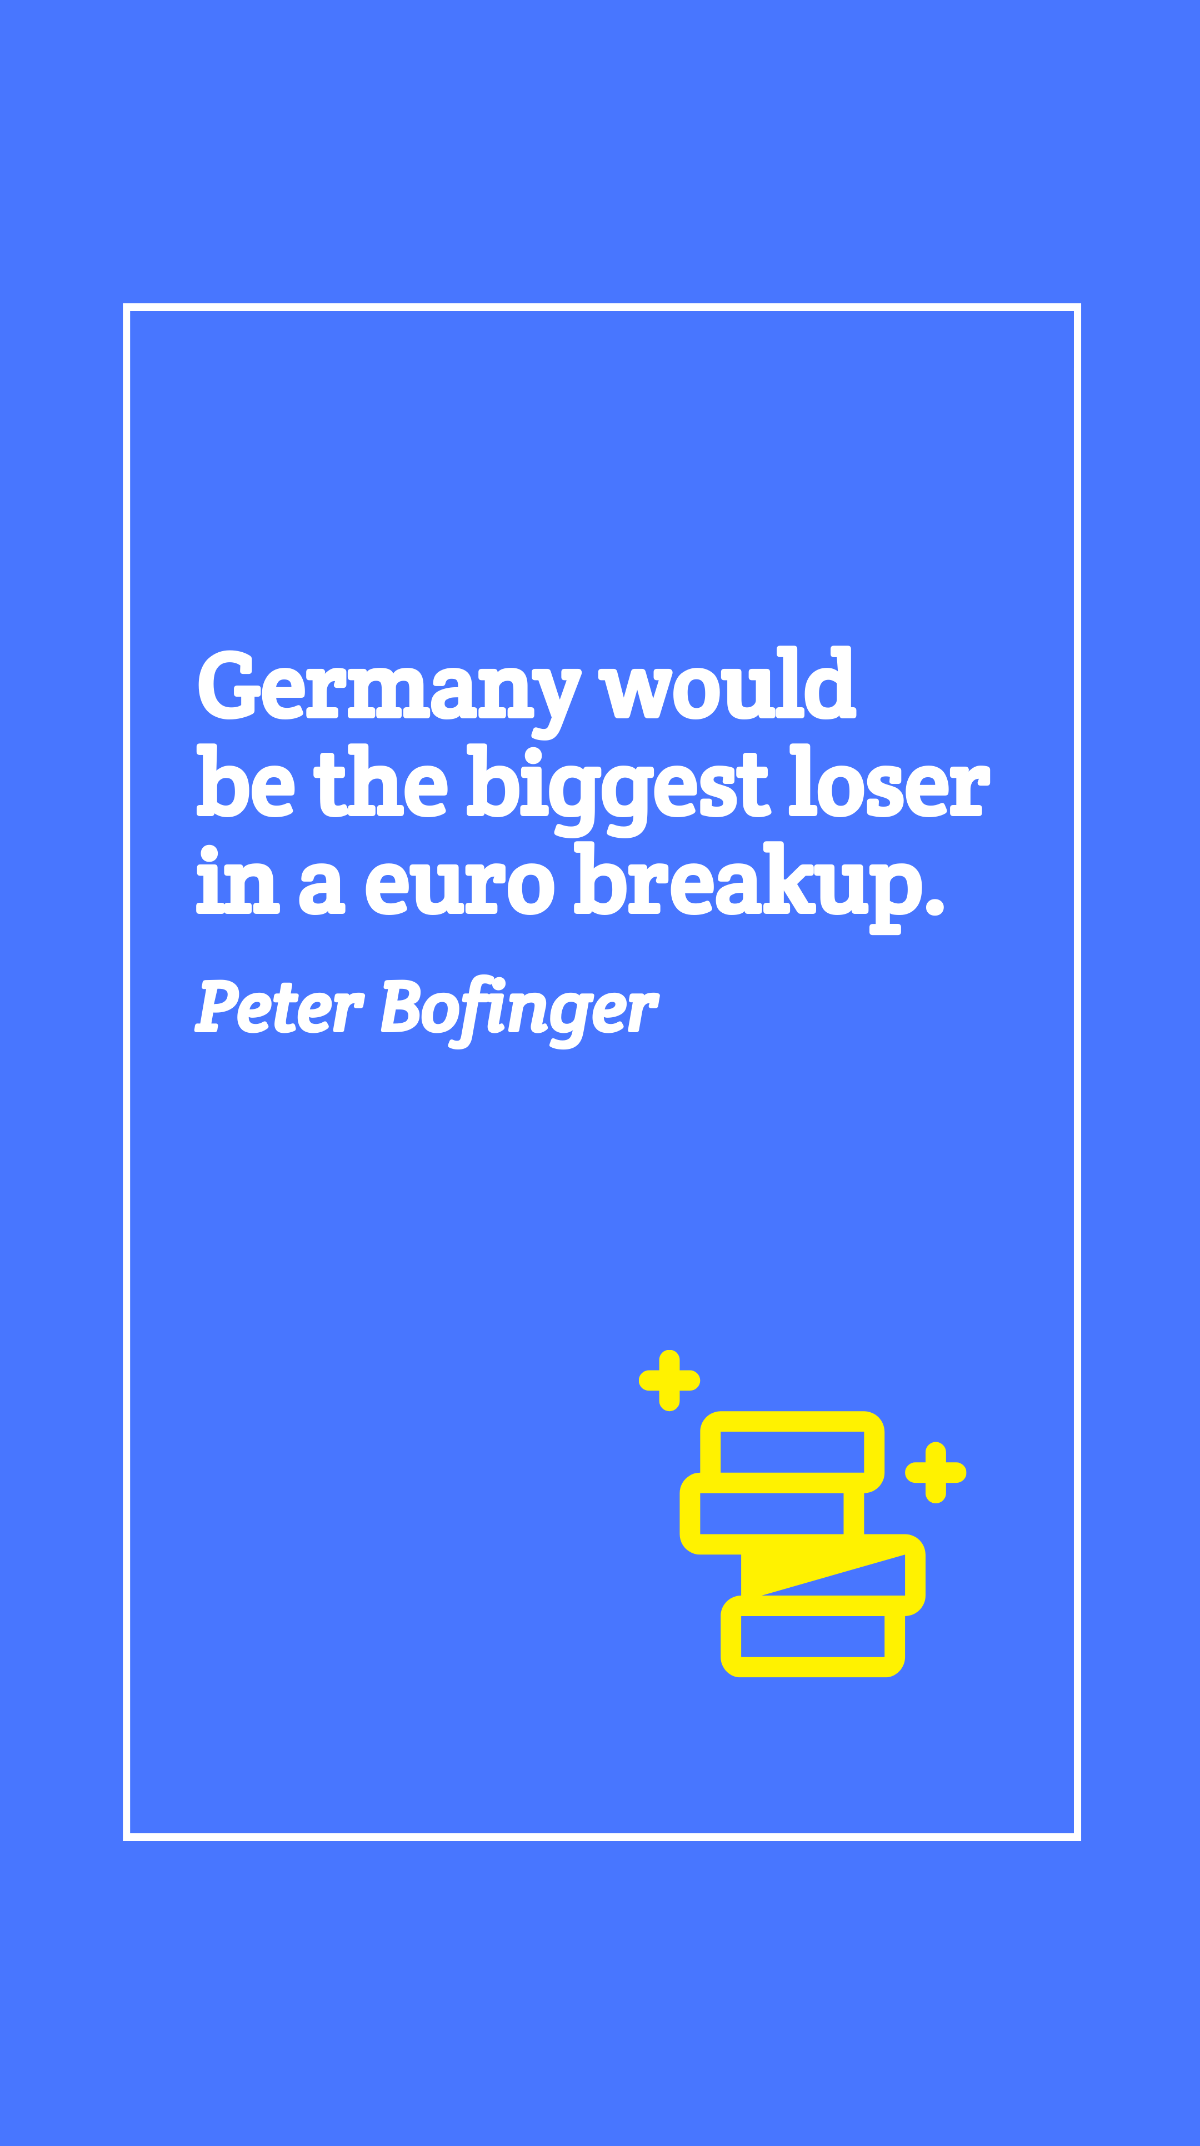 Free Peter Bofinger - Germany would be the biggest loser in a euro breakup. Template